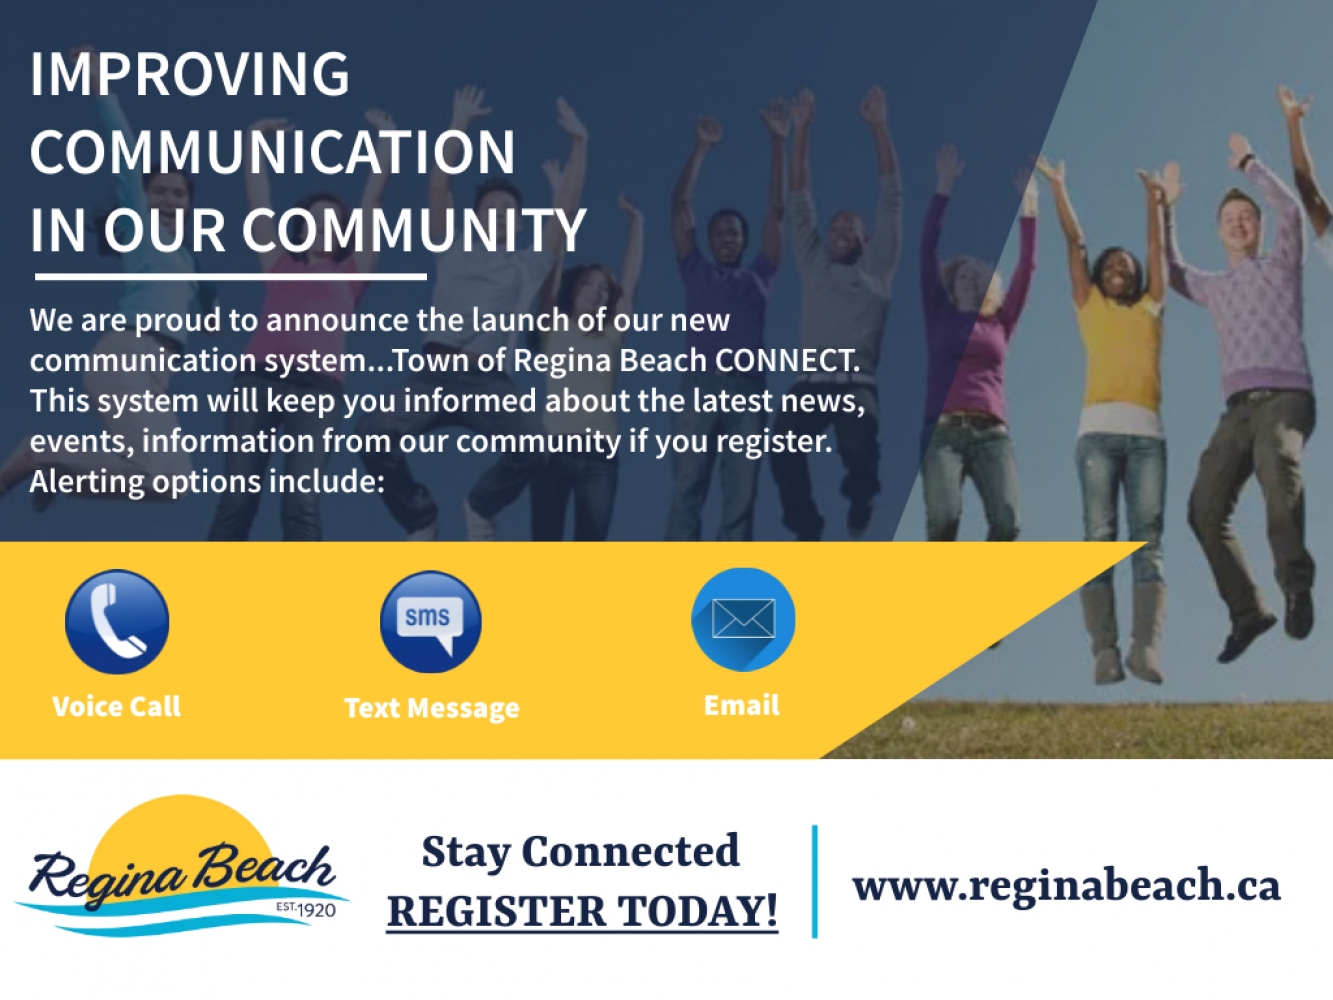 New Communication System - Register Today!